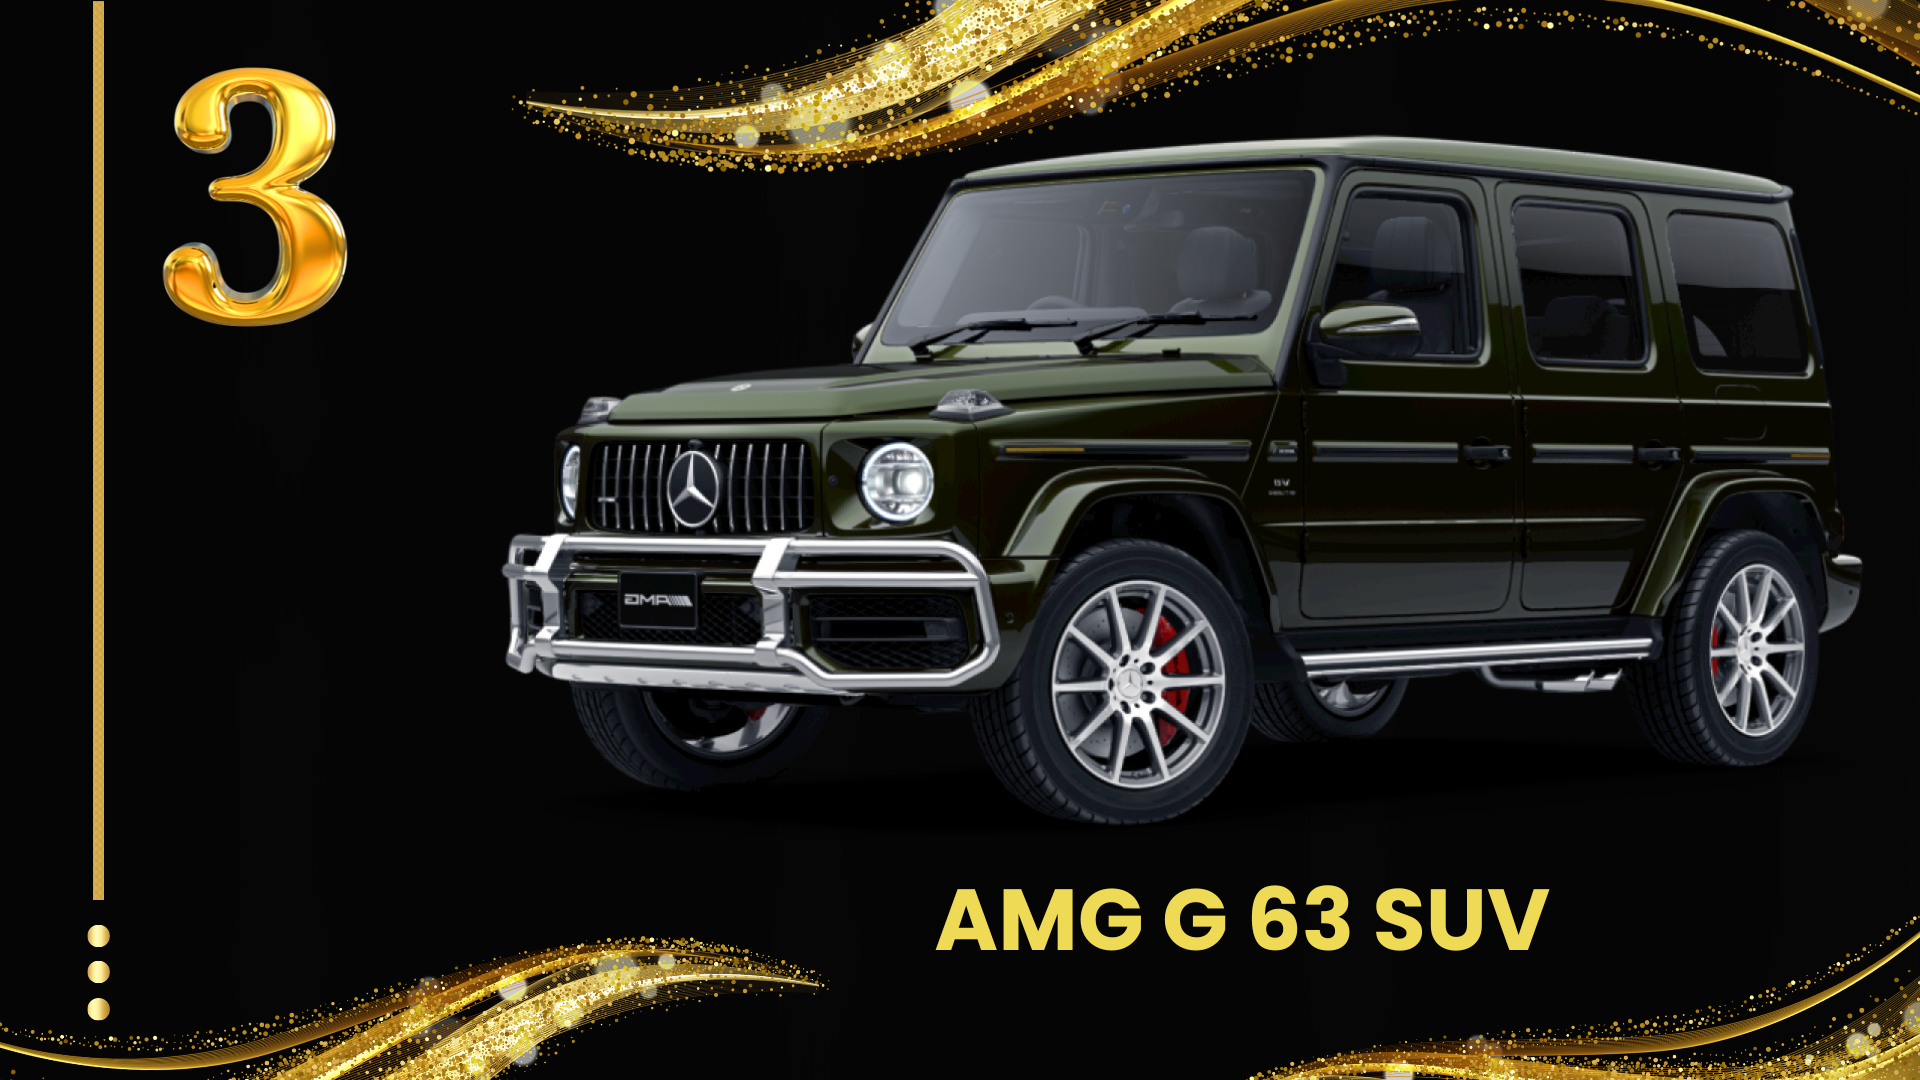 #3 AMG G63 SUV qualifies for section 179 tax credit